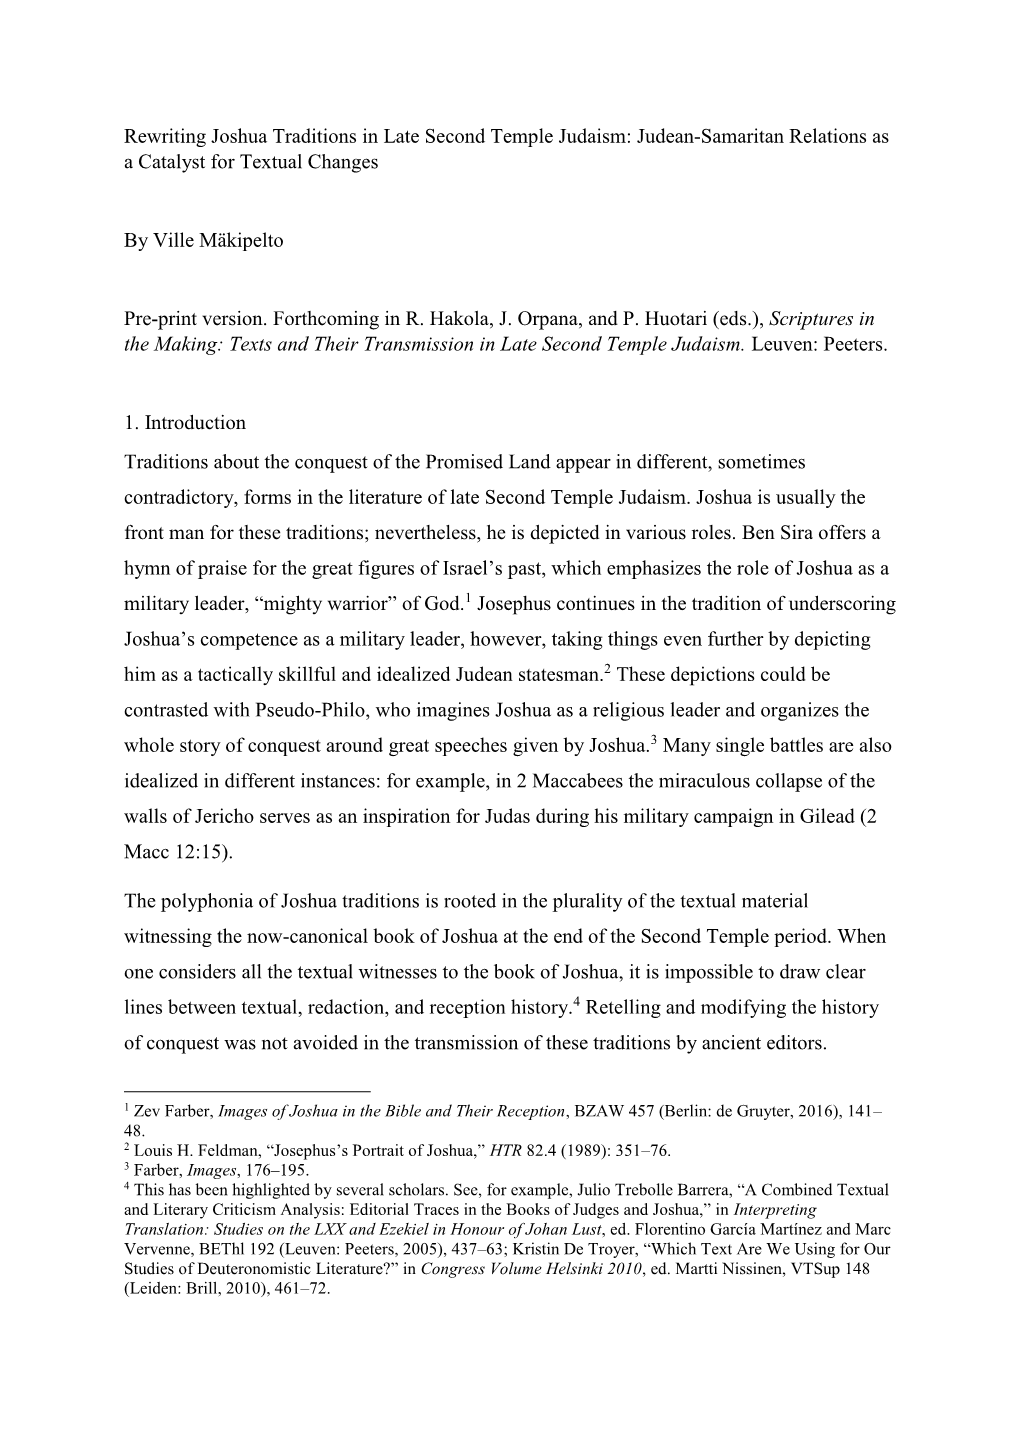 Rewriting Joshua Traditions in Late Second Temple Judaism: Judean-Samaritan Relations As a Catalyst for Textual Changes by Ville